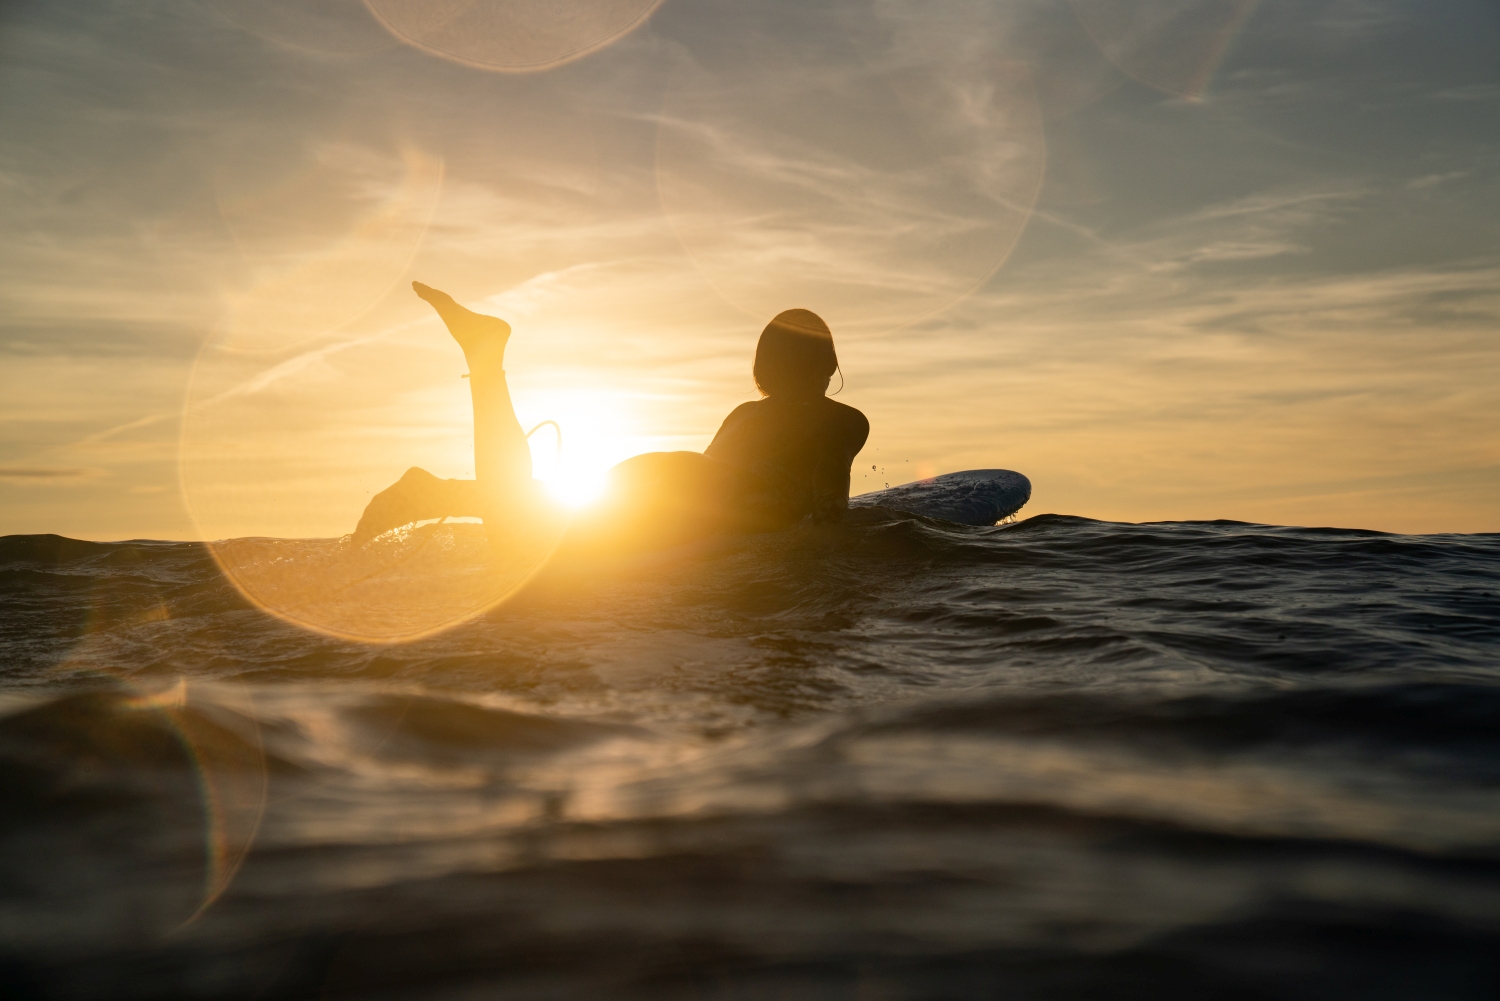 Silhouette of woman on surfboard with leg in the air and sunset in the background